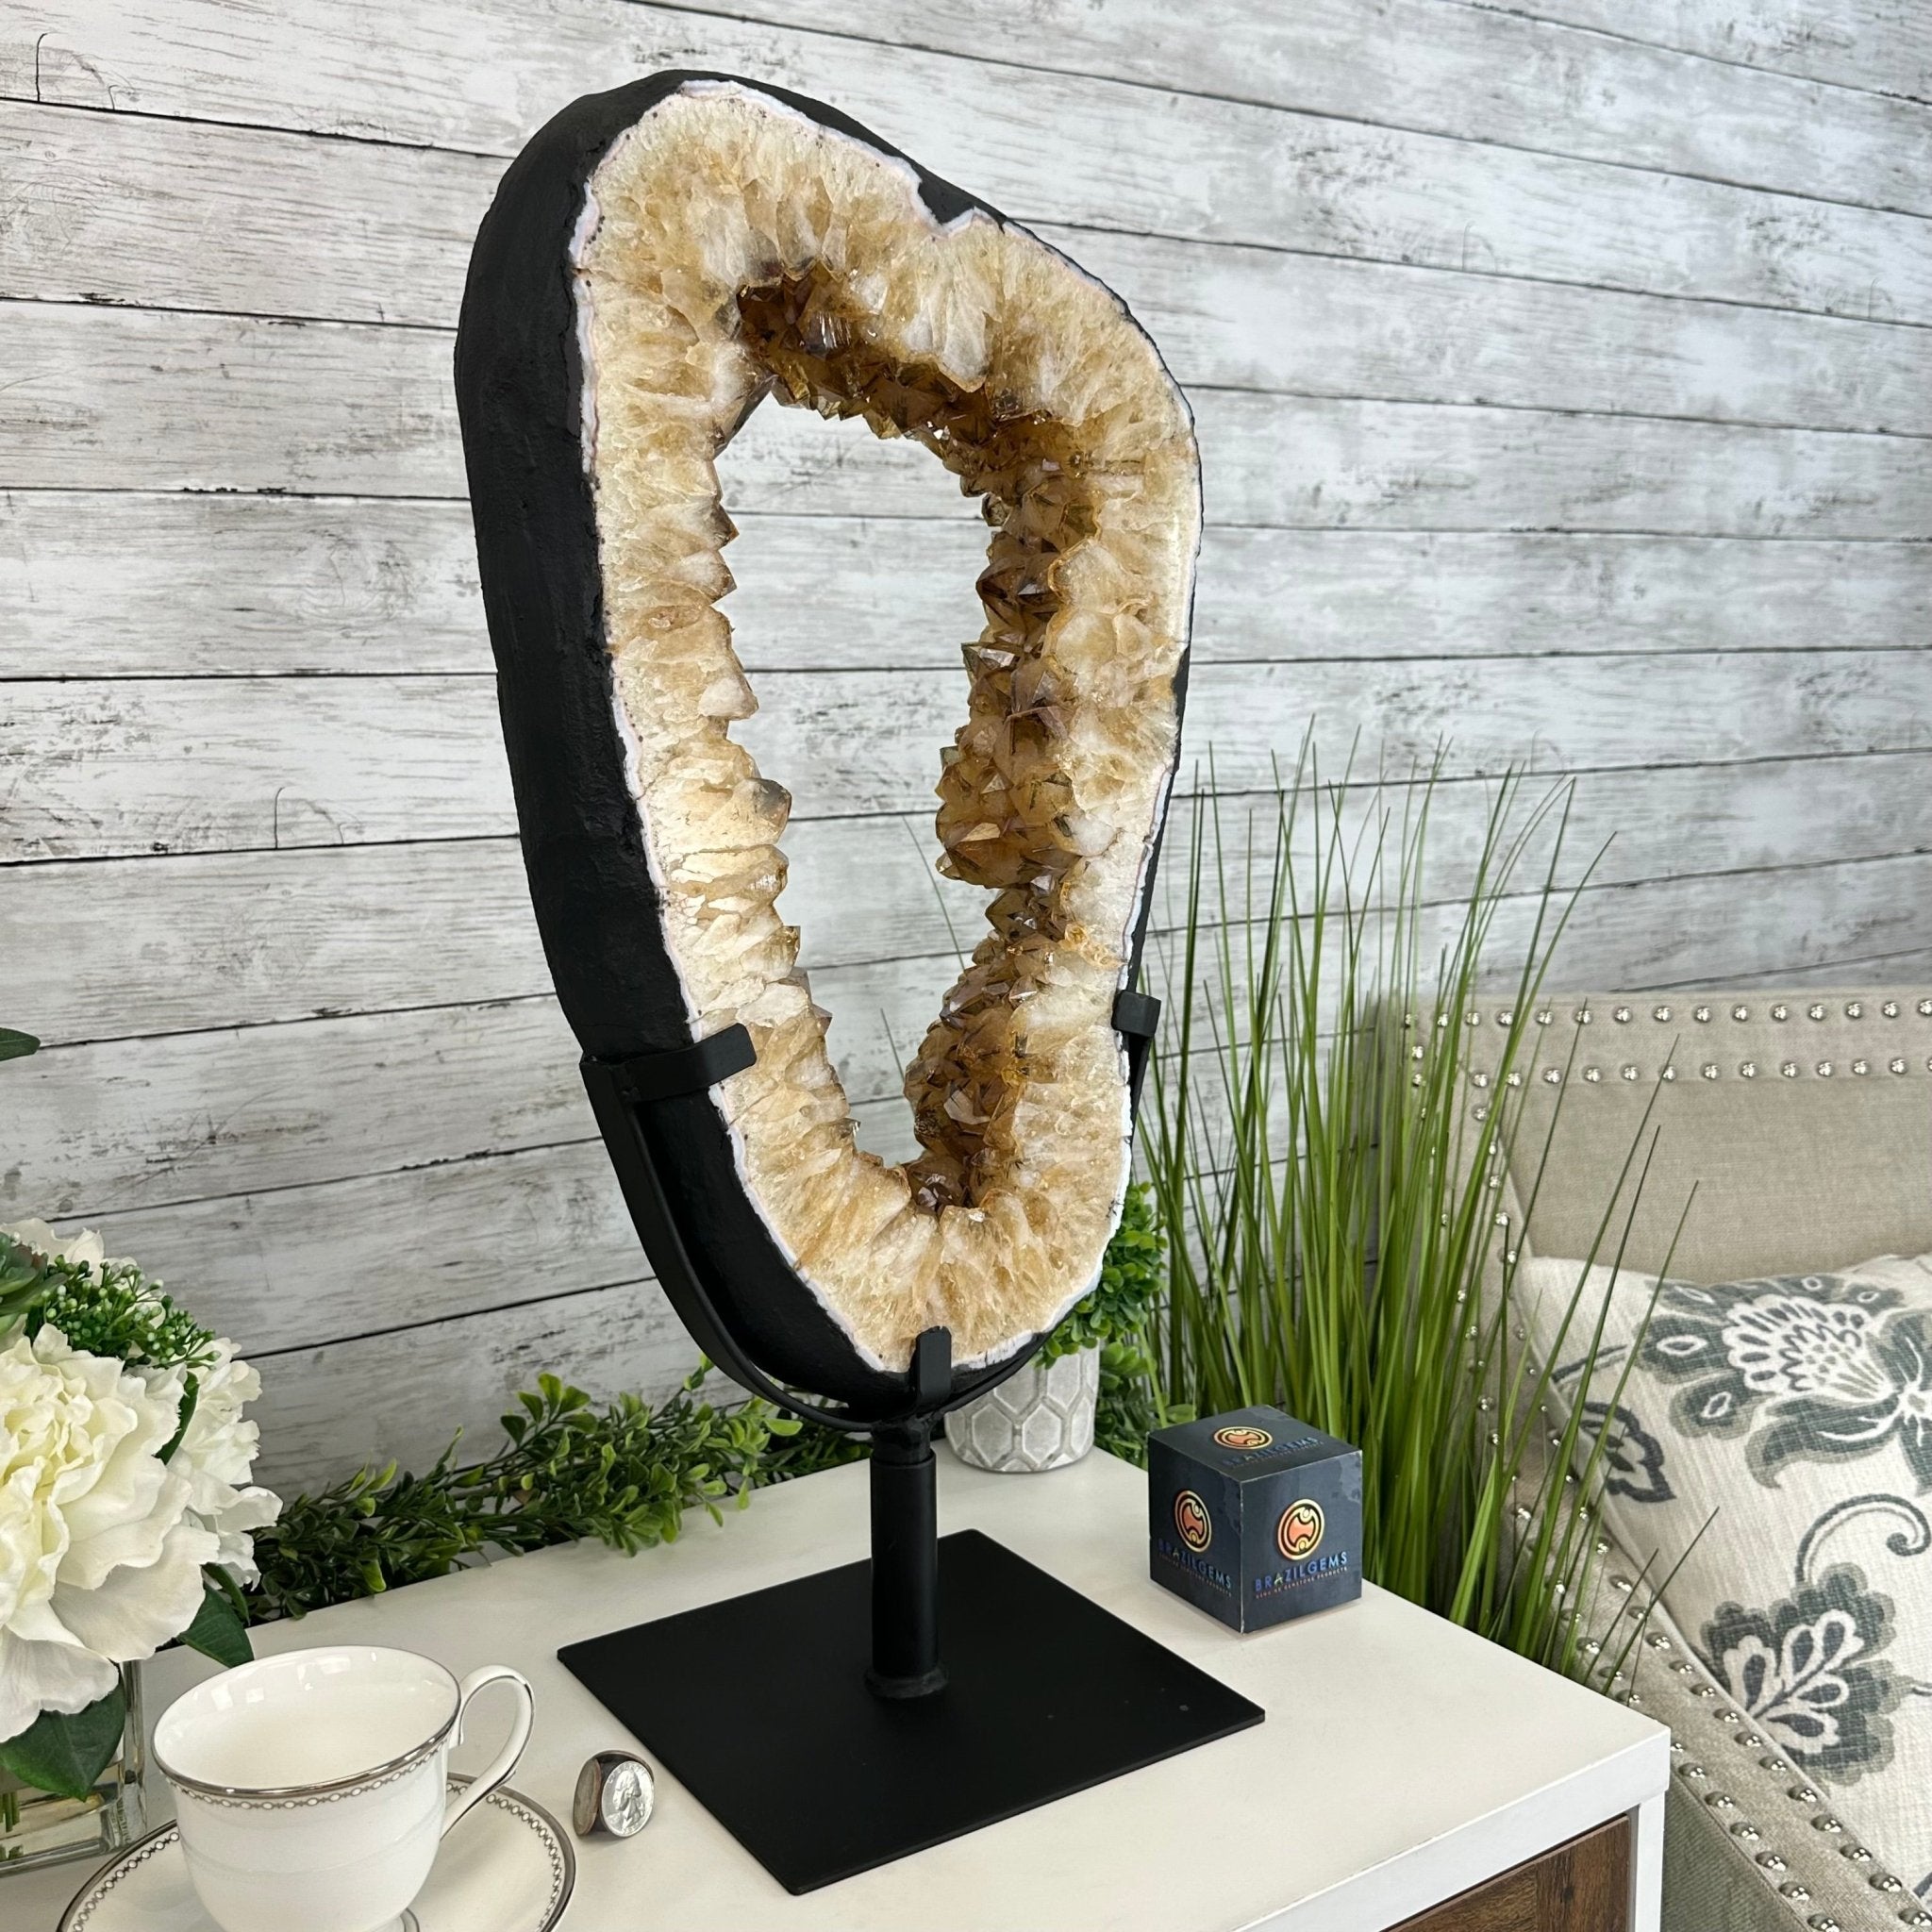 Citrine Portal on a Rotating Stand, 26.1 lbs & 23.6" tall #5625-0006 by Brazil Gems® - Brazil GemsBrazil GemsCitrine Portal on a Rotating Stand, 26.1 lbs & 23.6" tall #5625-0006 by Brazil Gems®Portals on Rotating Bases5625-0006